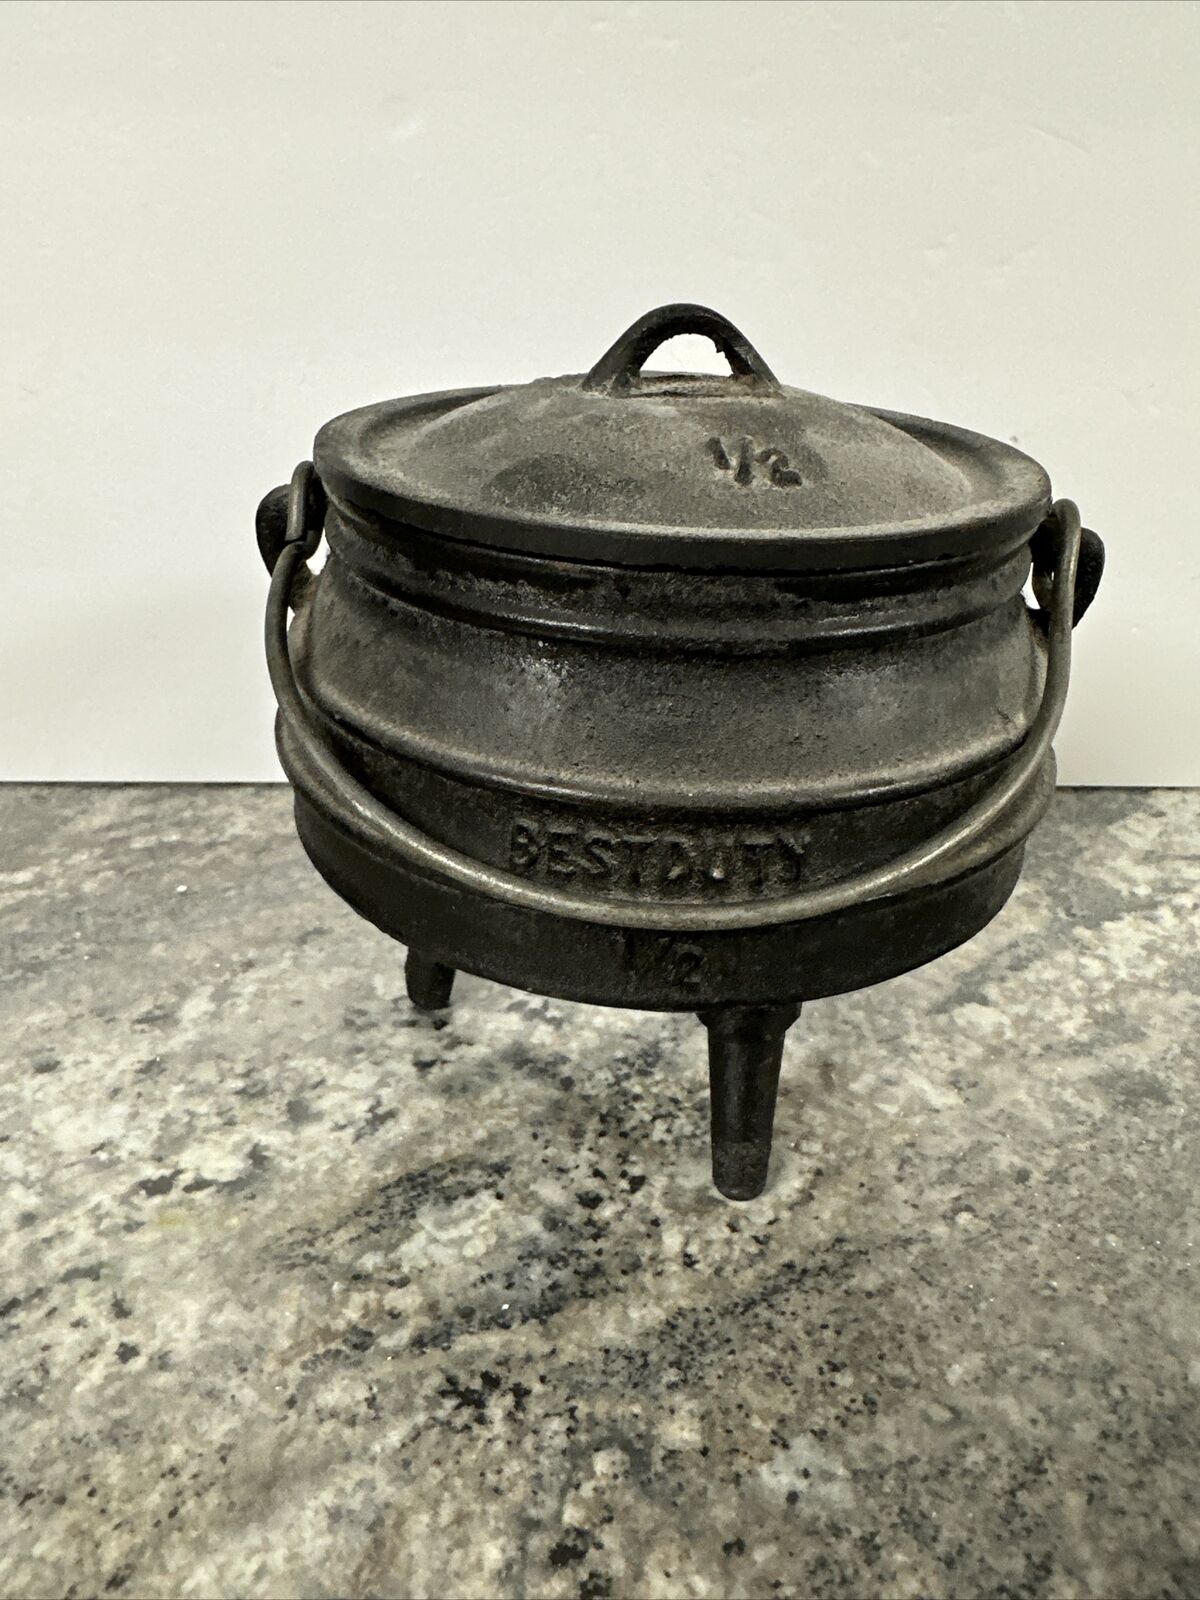 Vintage Best Duty Cast Iron Cauldron 1/2 South Africa Wicca Gypsy Cooking Pot